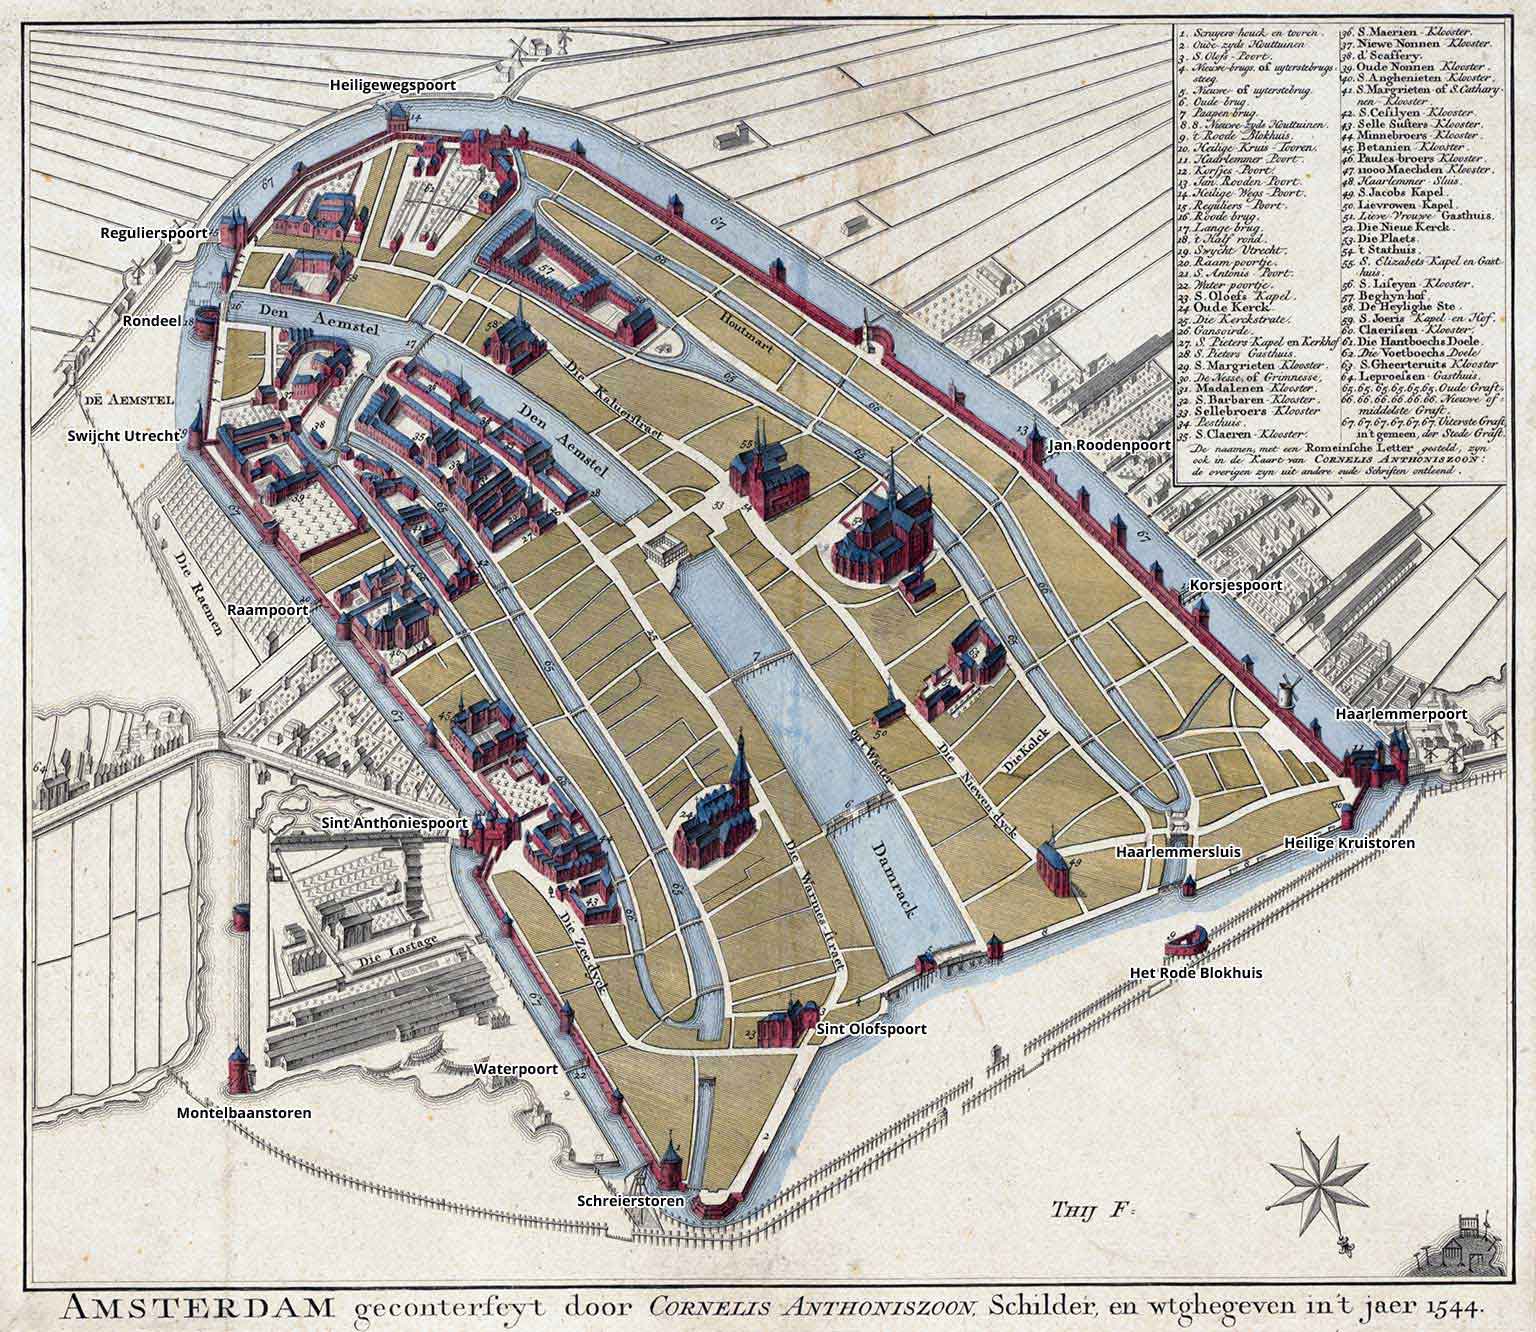 Map from 1544 by Cornelis Anthonisz showing churches and convents in Amsterdam within the walled in city